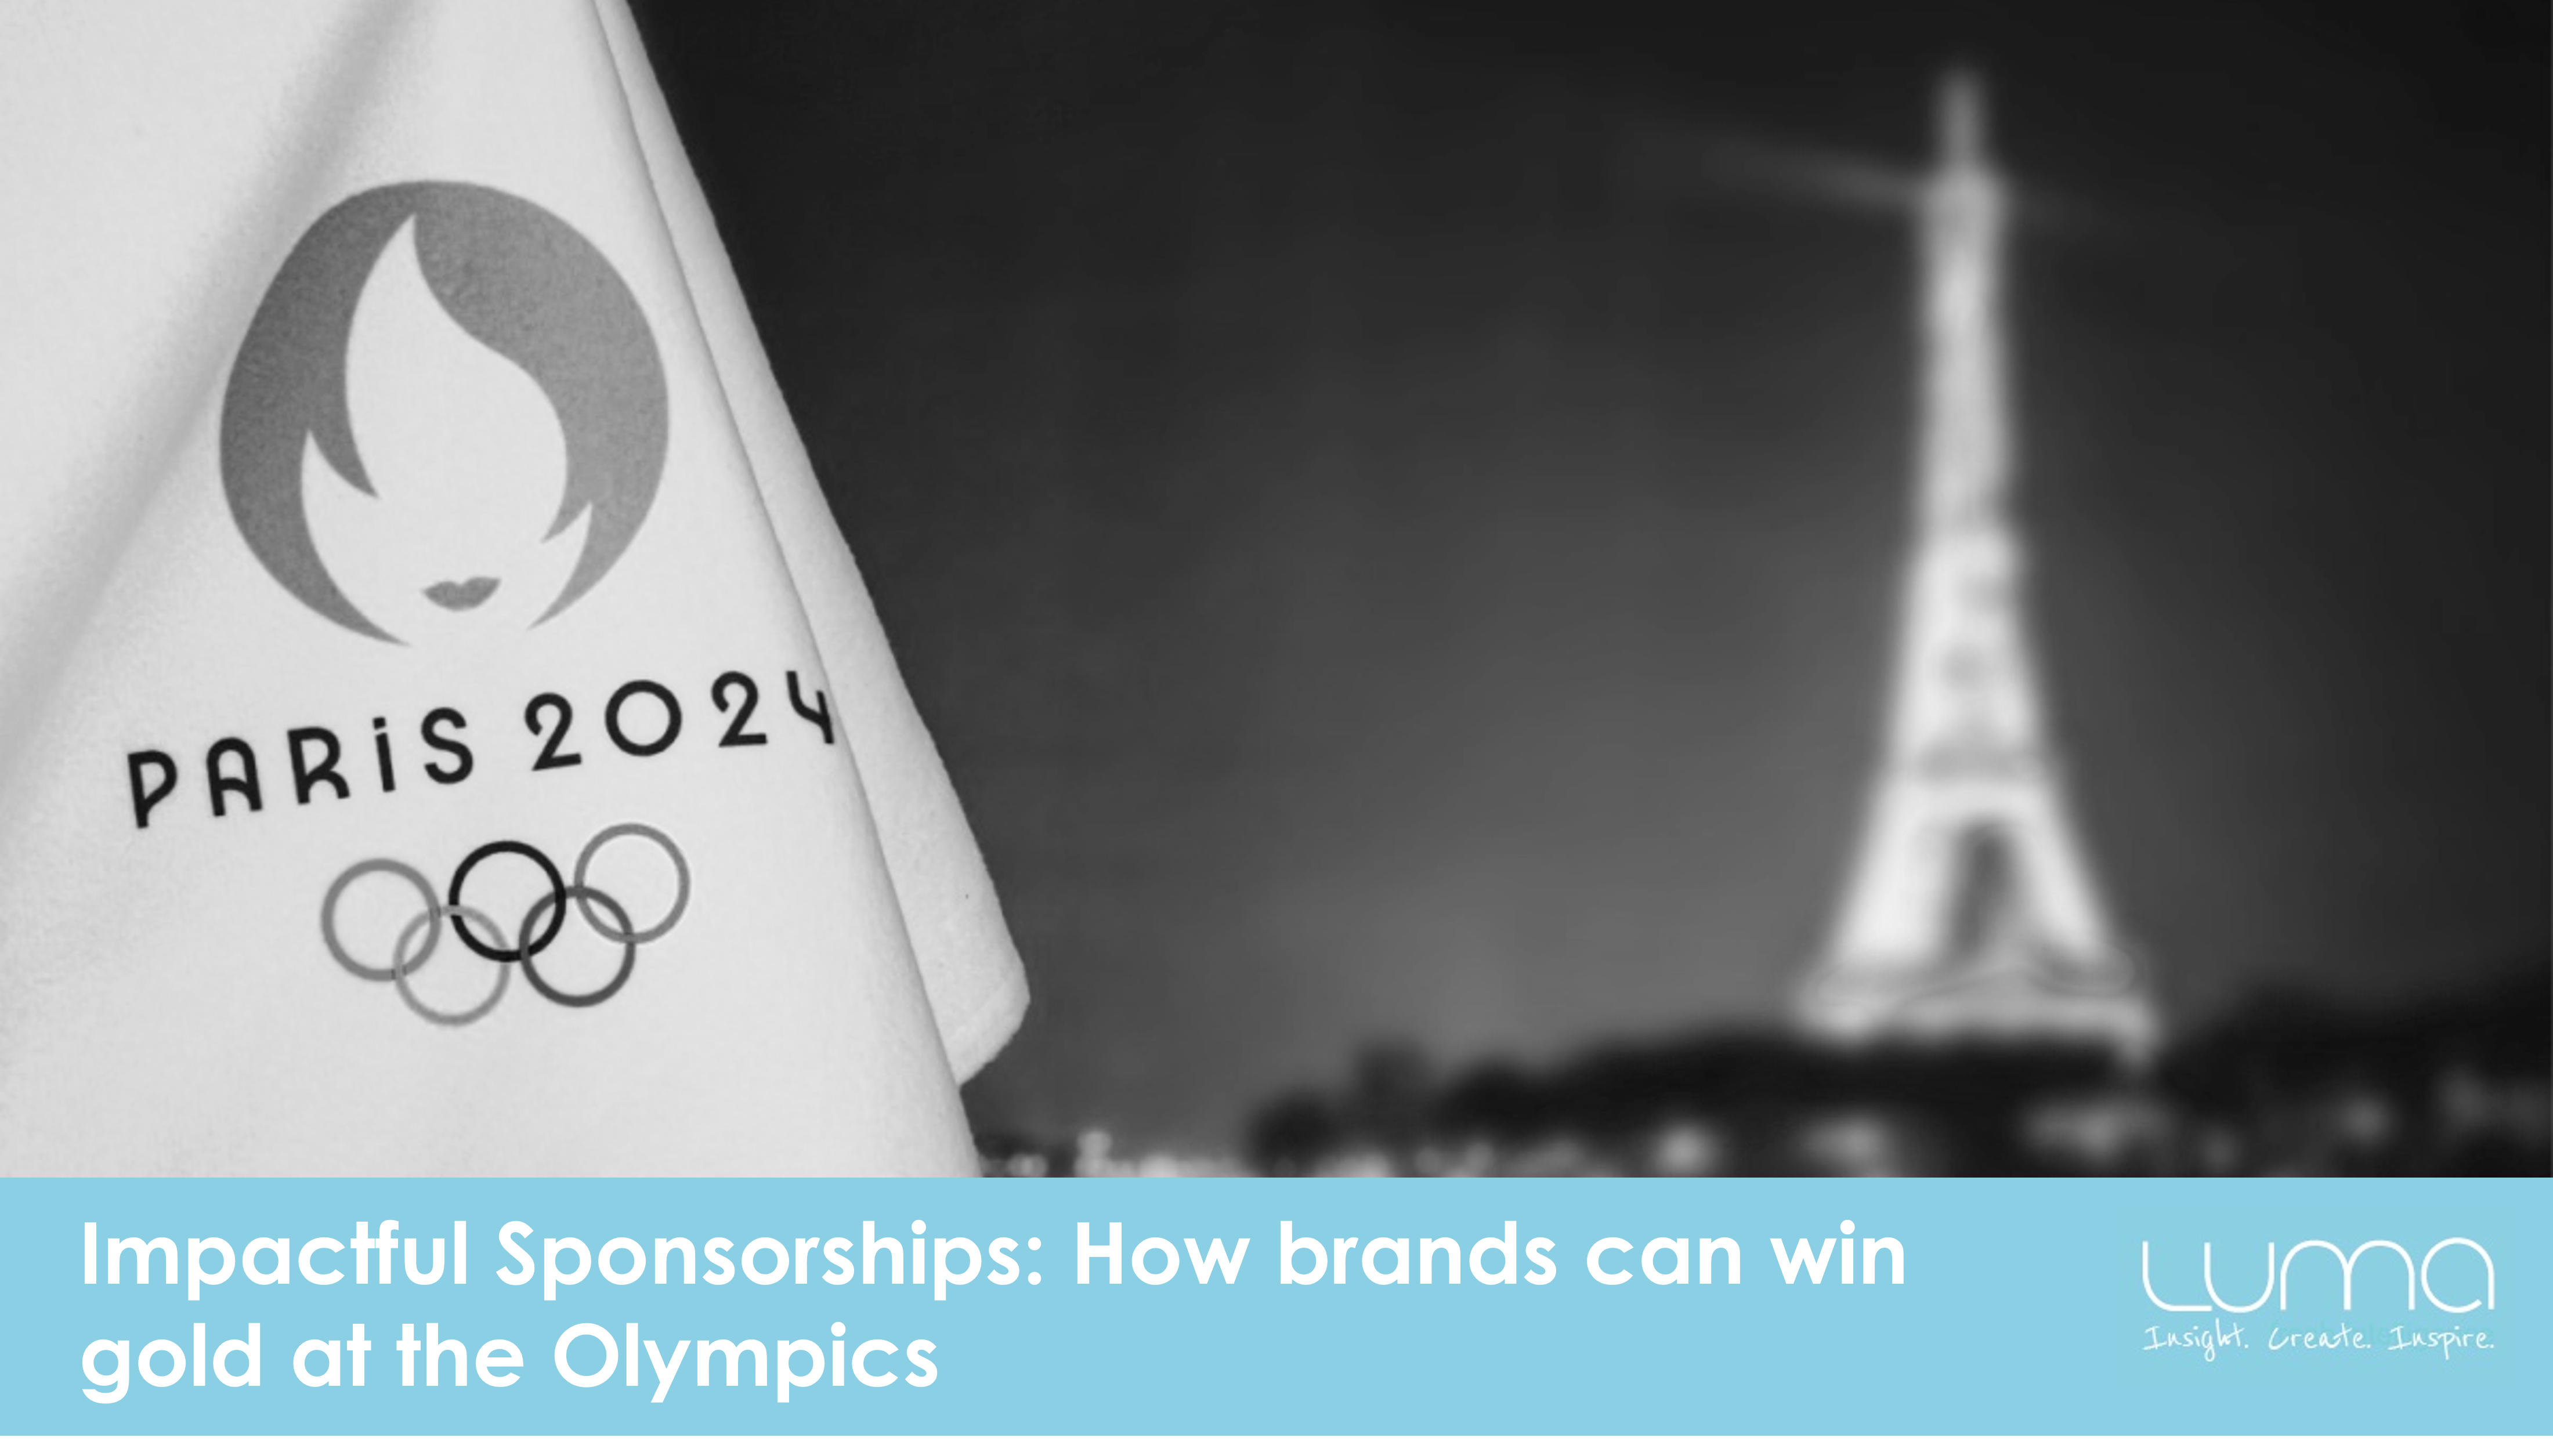 Impactful Sponsorships: How brands can win gold at the Olympics